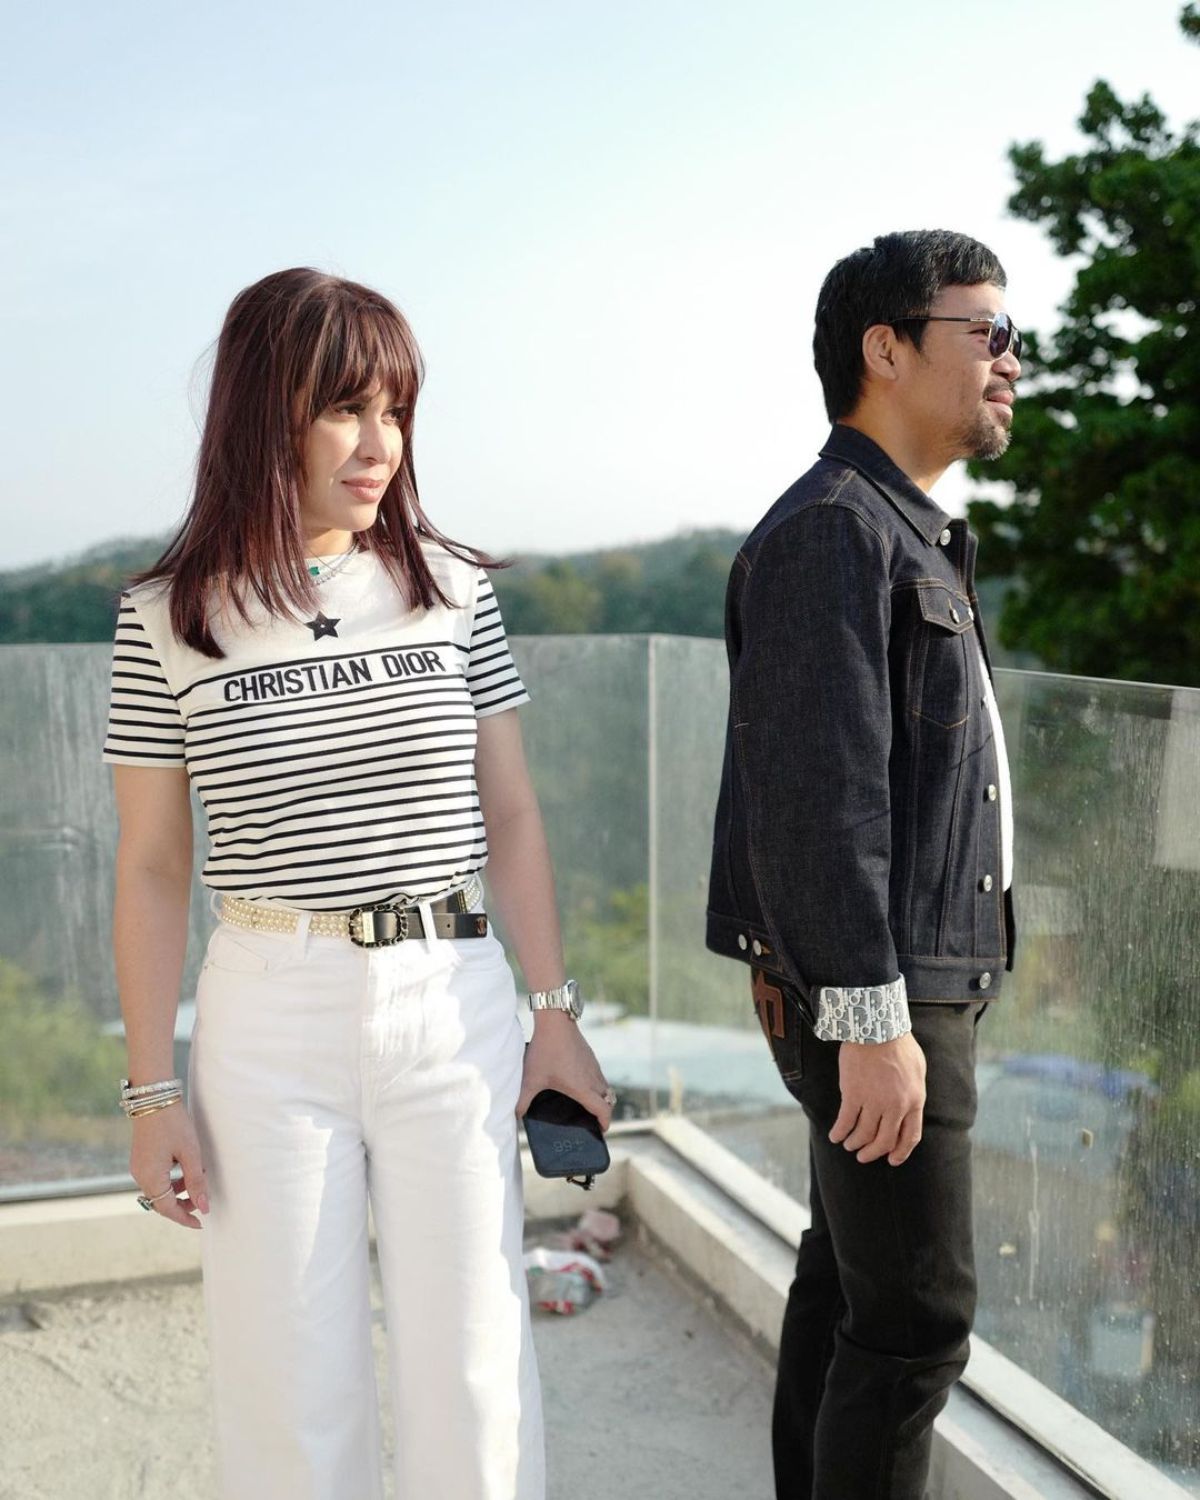 Jinkee Pacquiao Shows Off Her New Bangs With A Designer Ootd Worth Over  P2.4 Million